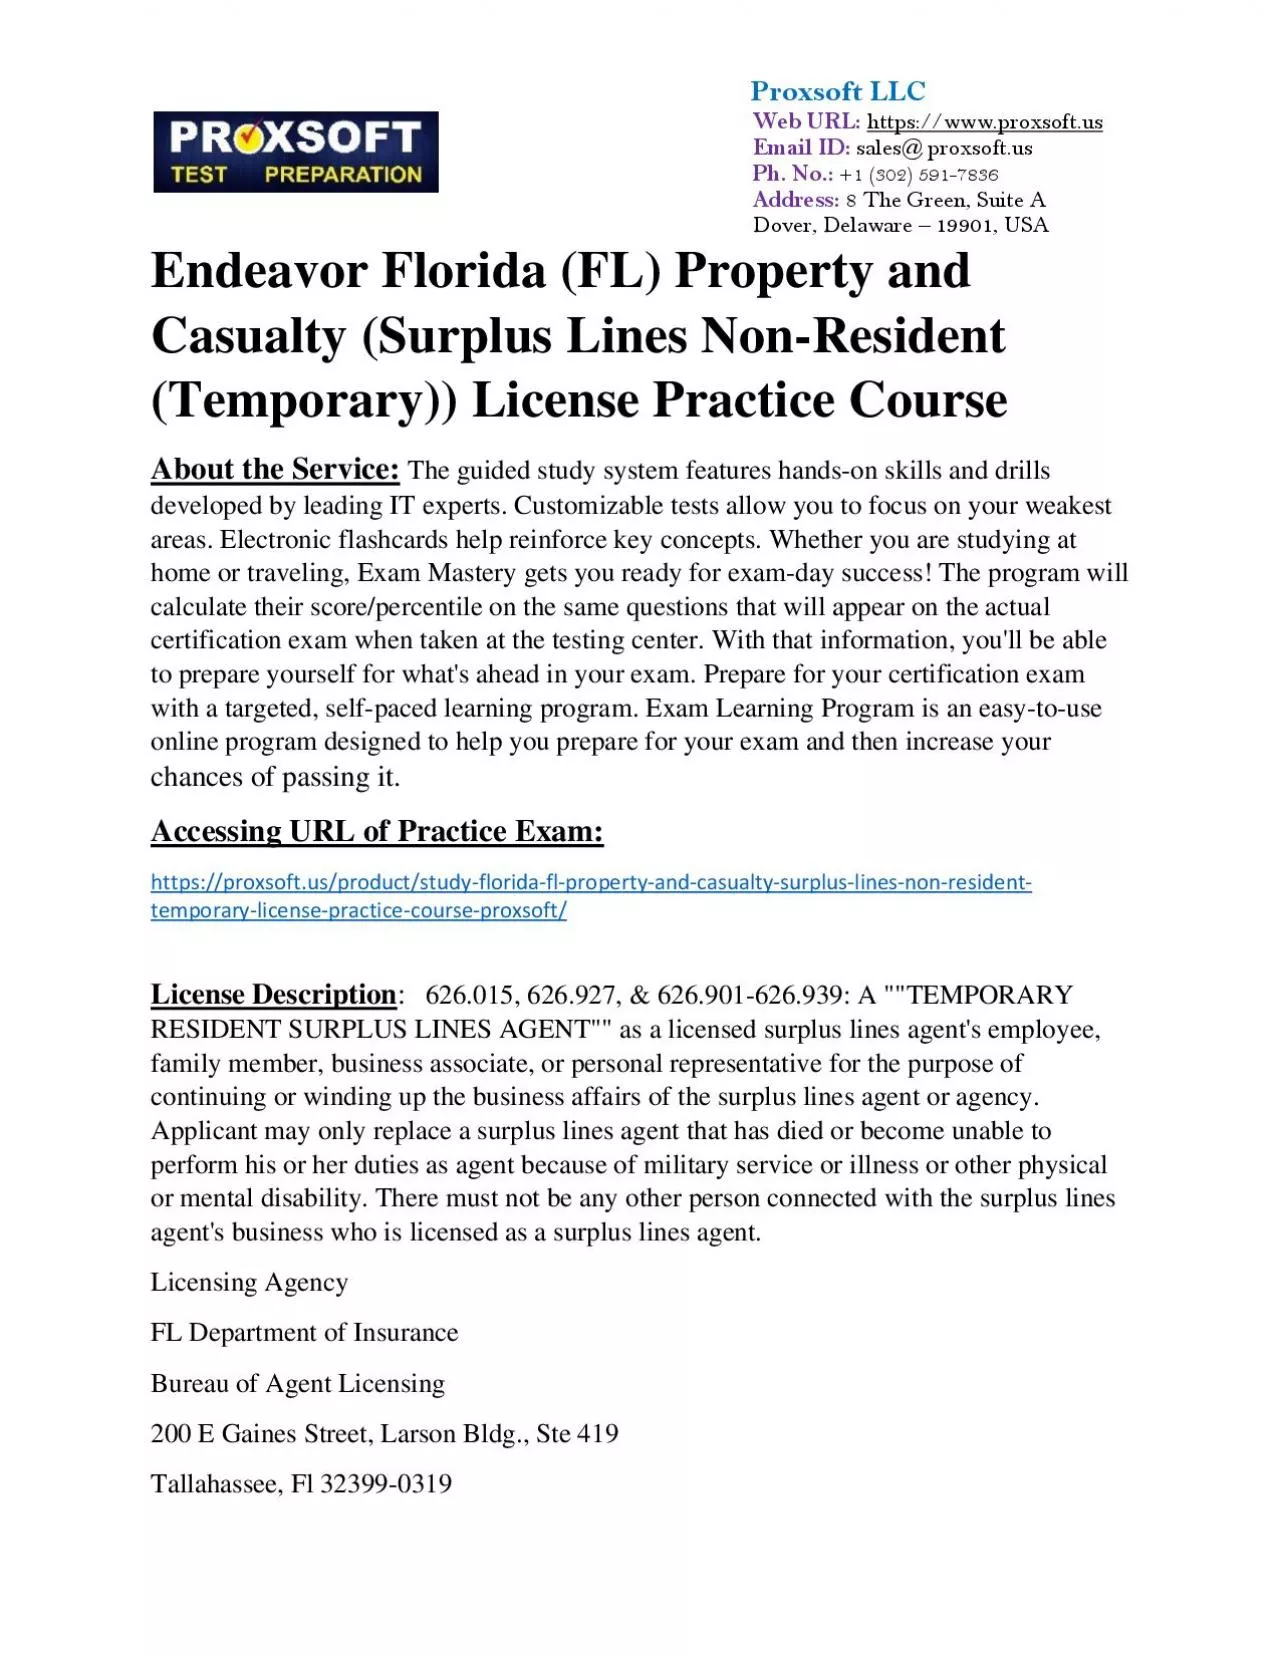 Endeavor Florida (FL) Property and Casualty (Surplus Lines Non-Resident (Temporary)) License